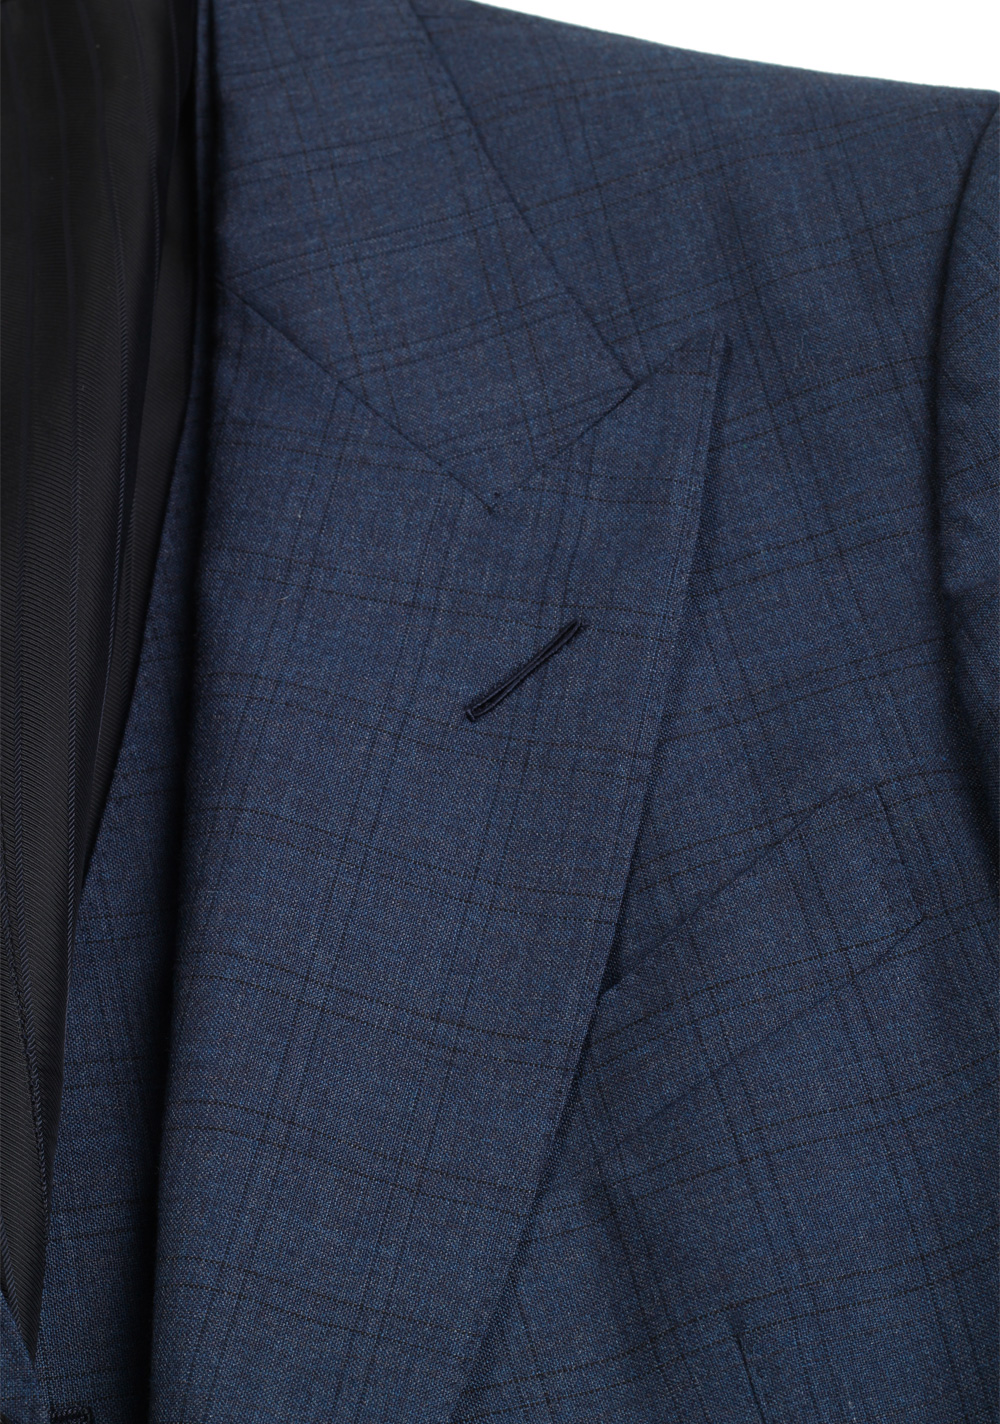 TOM FORD Windsor Checked Blue 3 Piece Suit Size 48 / 38R U.S. Wool Fit A | Costume Limité